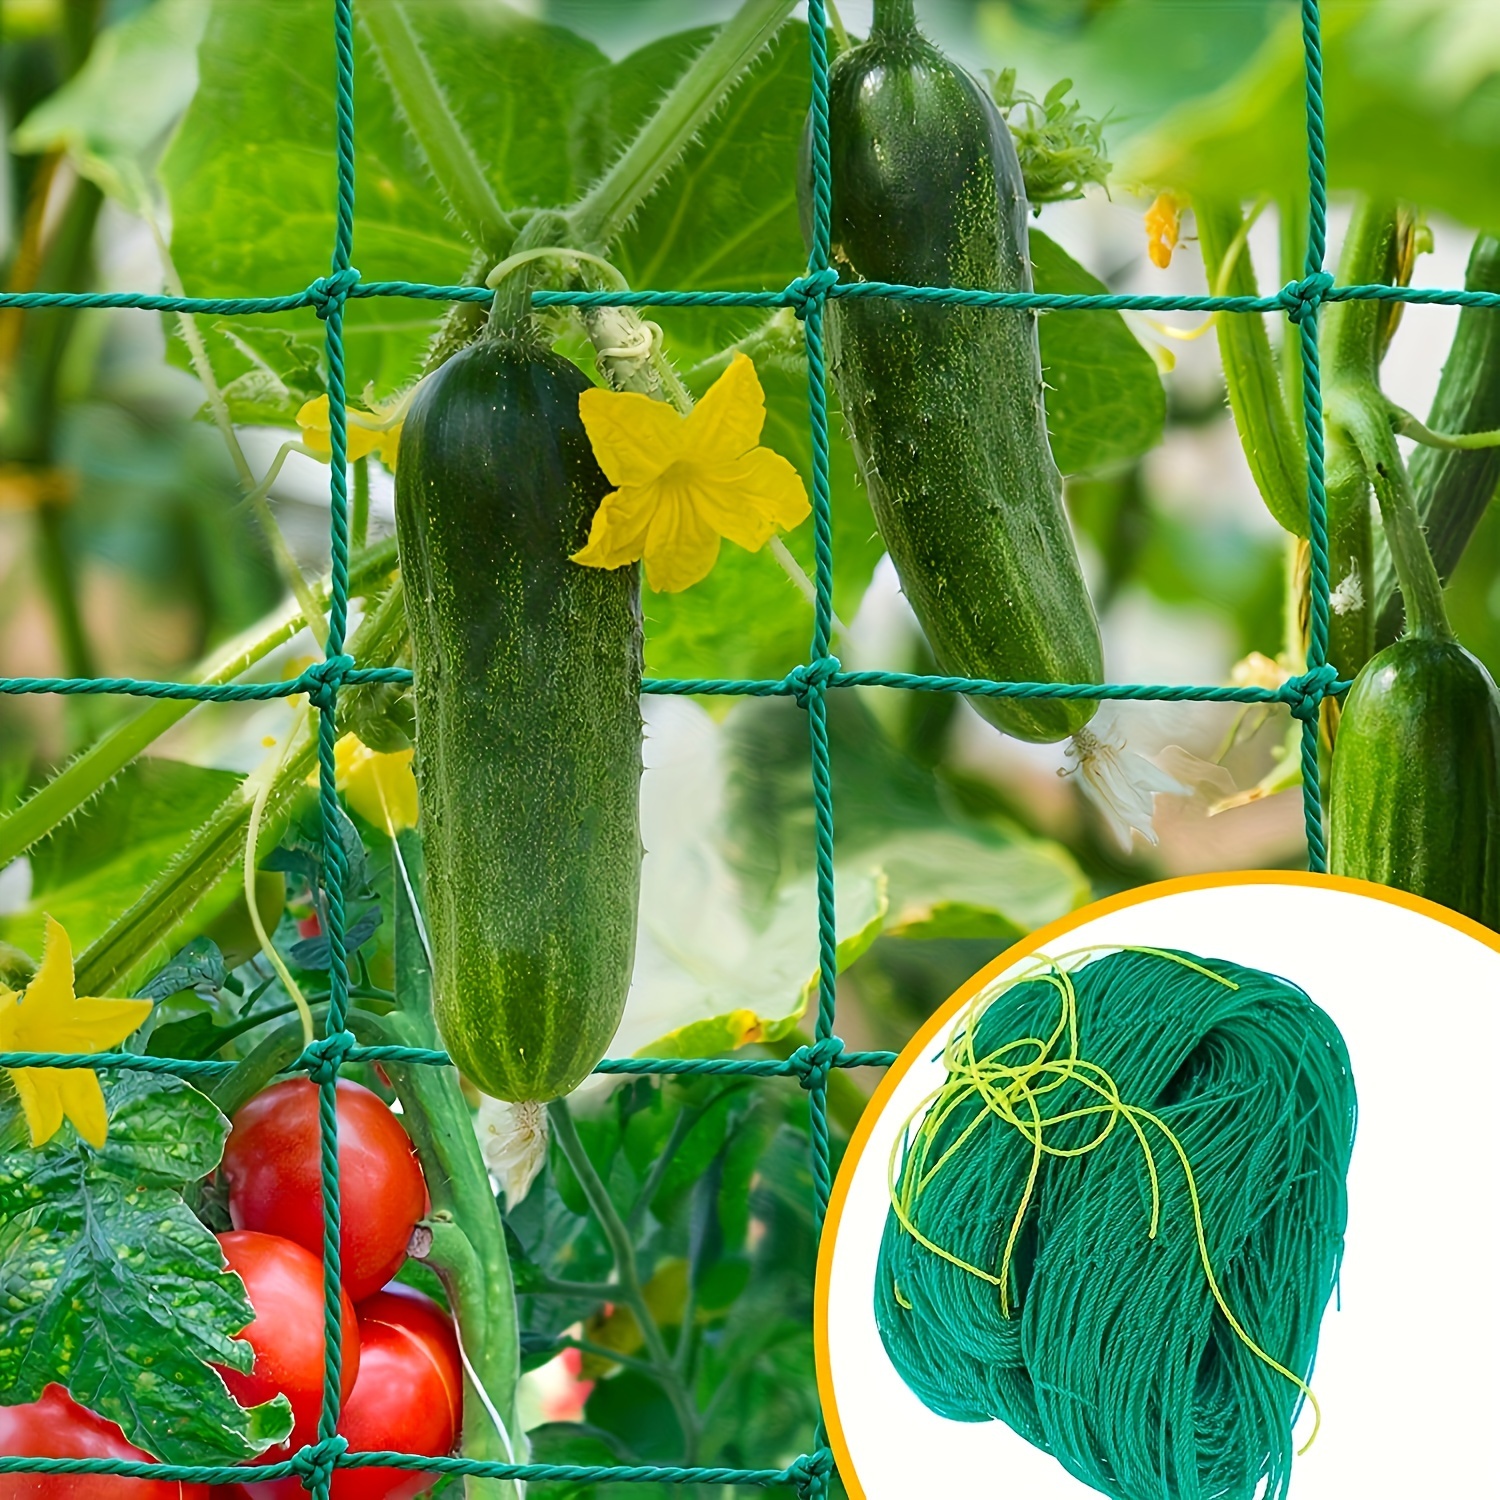 

Garden Trellis Netting For Climbing Plants - 1 Pack Plastic Plant Support Net For Cucumbers, Tomatoes, Grapes, Beans, Peas - Durable 4x4 Inch Mesh Outdoor Vining Vegetable Trellis